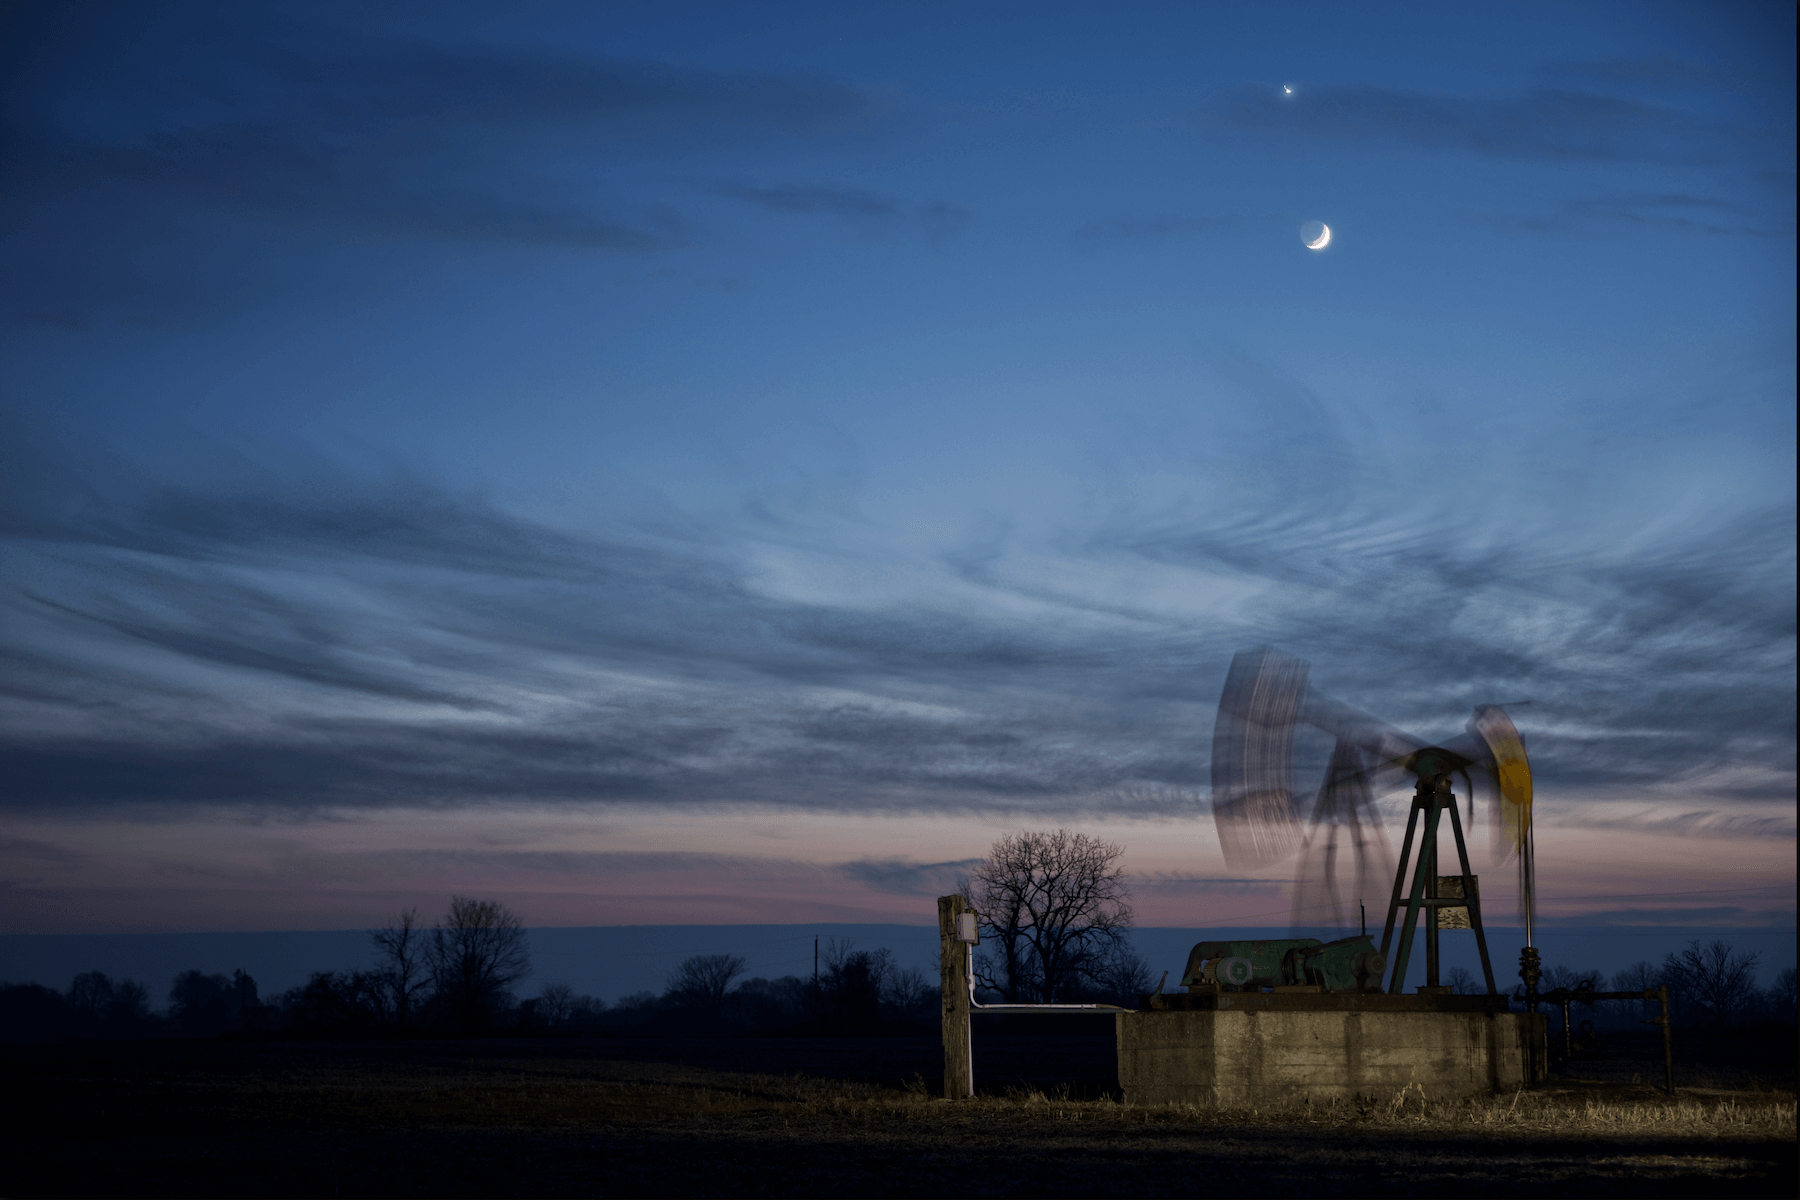 a oil well pump jack blurring action due to time lapse photography